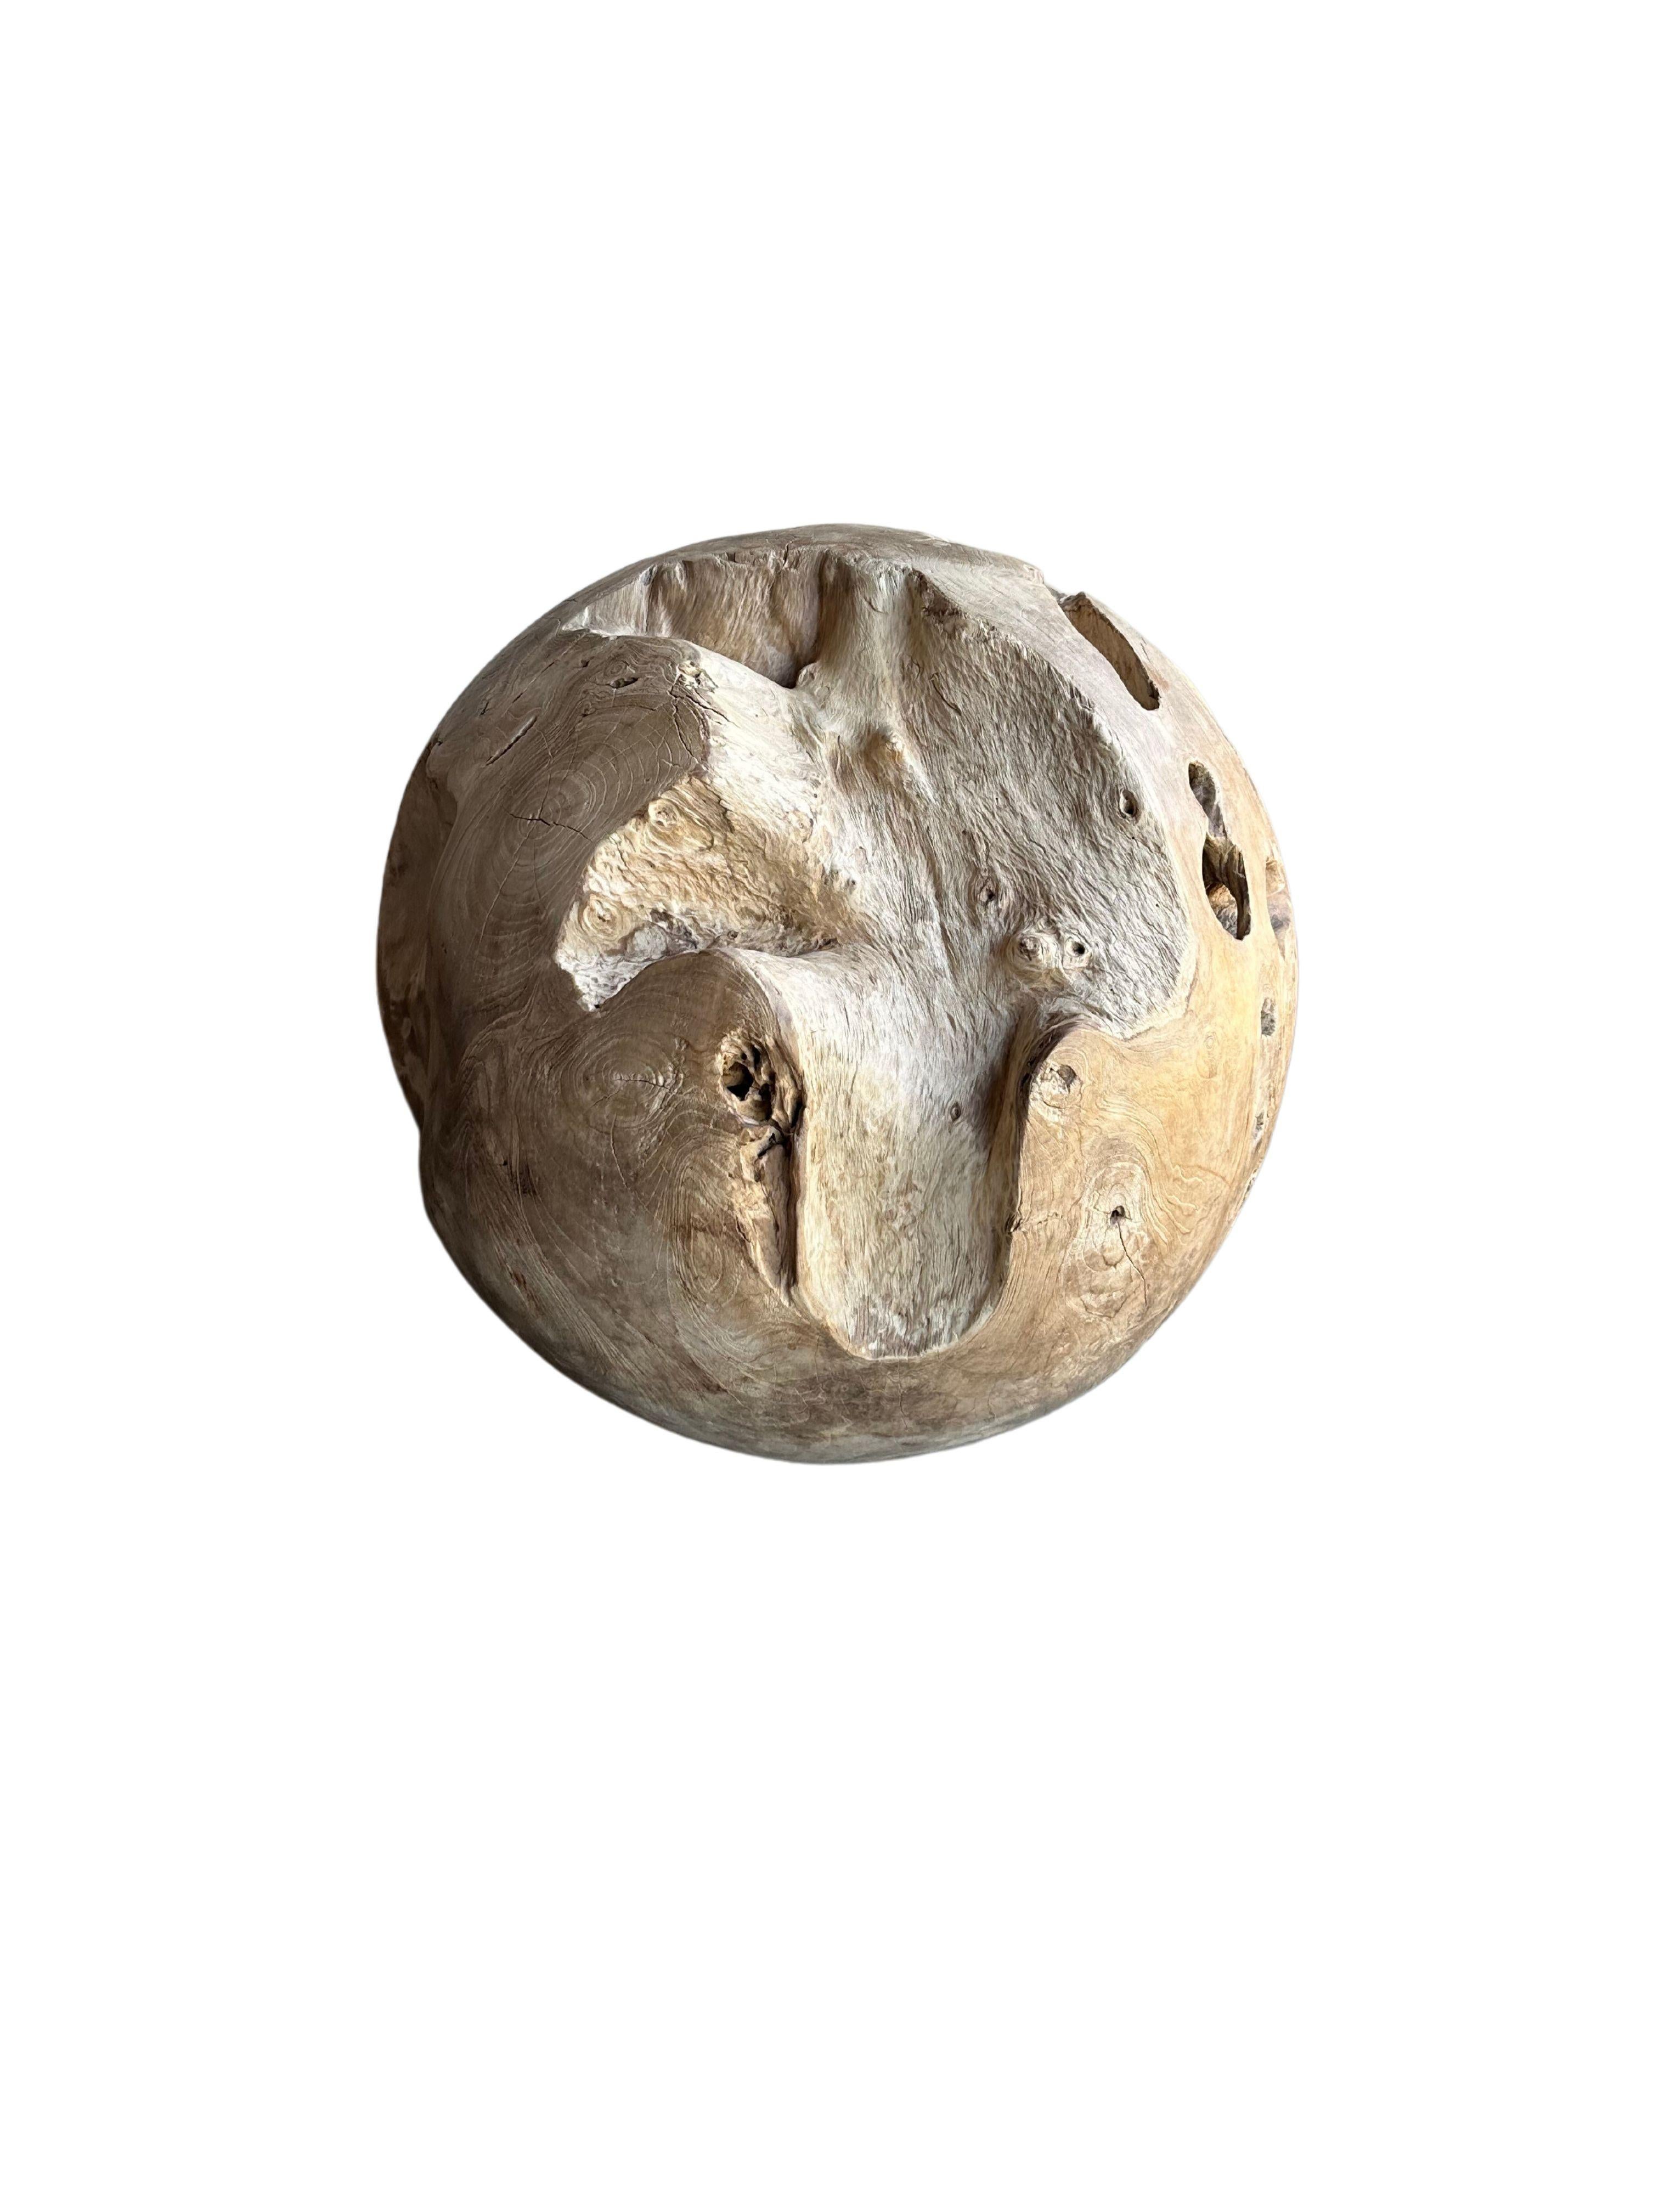 Indonesian Decorative Abstract Teak Wood Sphere, Modern Organic, with stunning textures For Sale